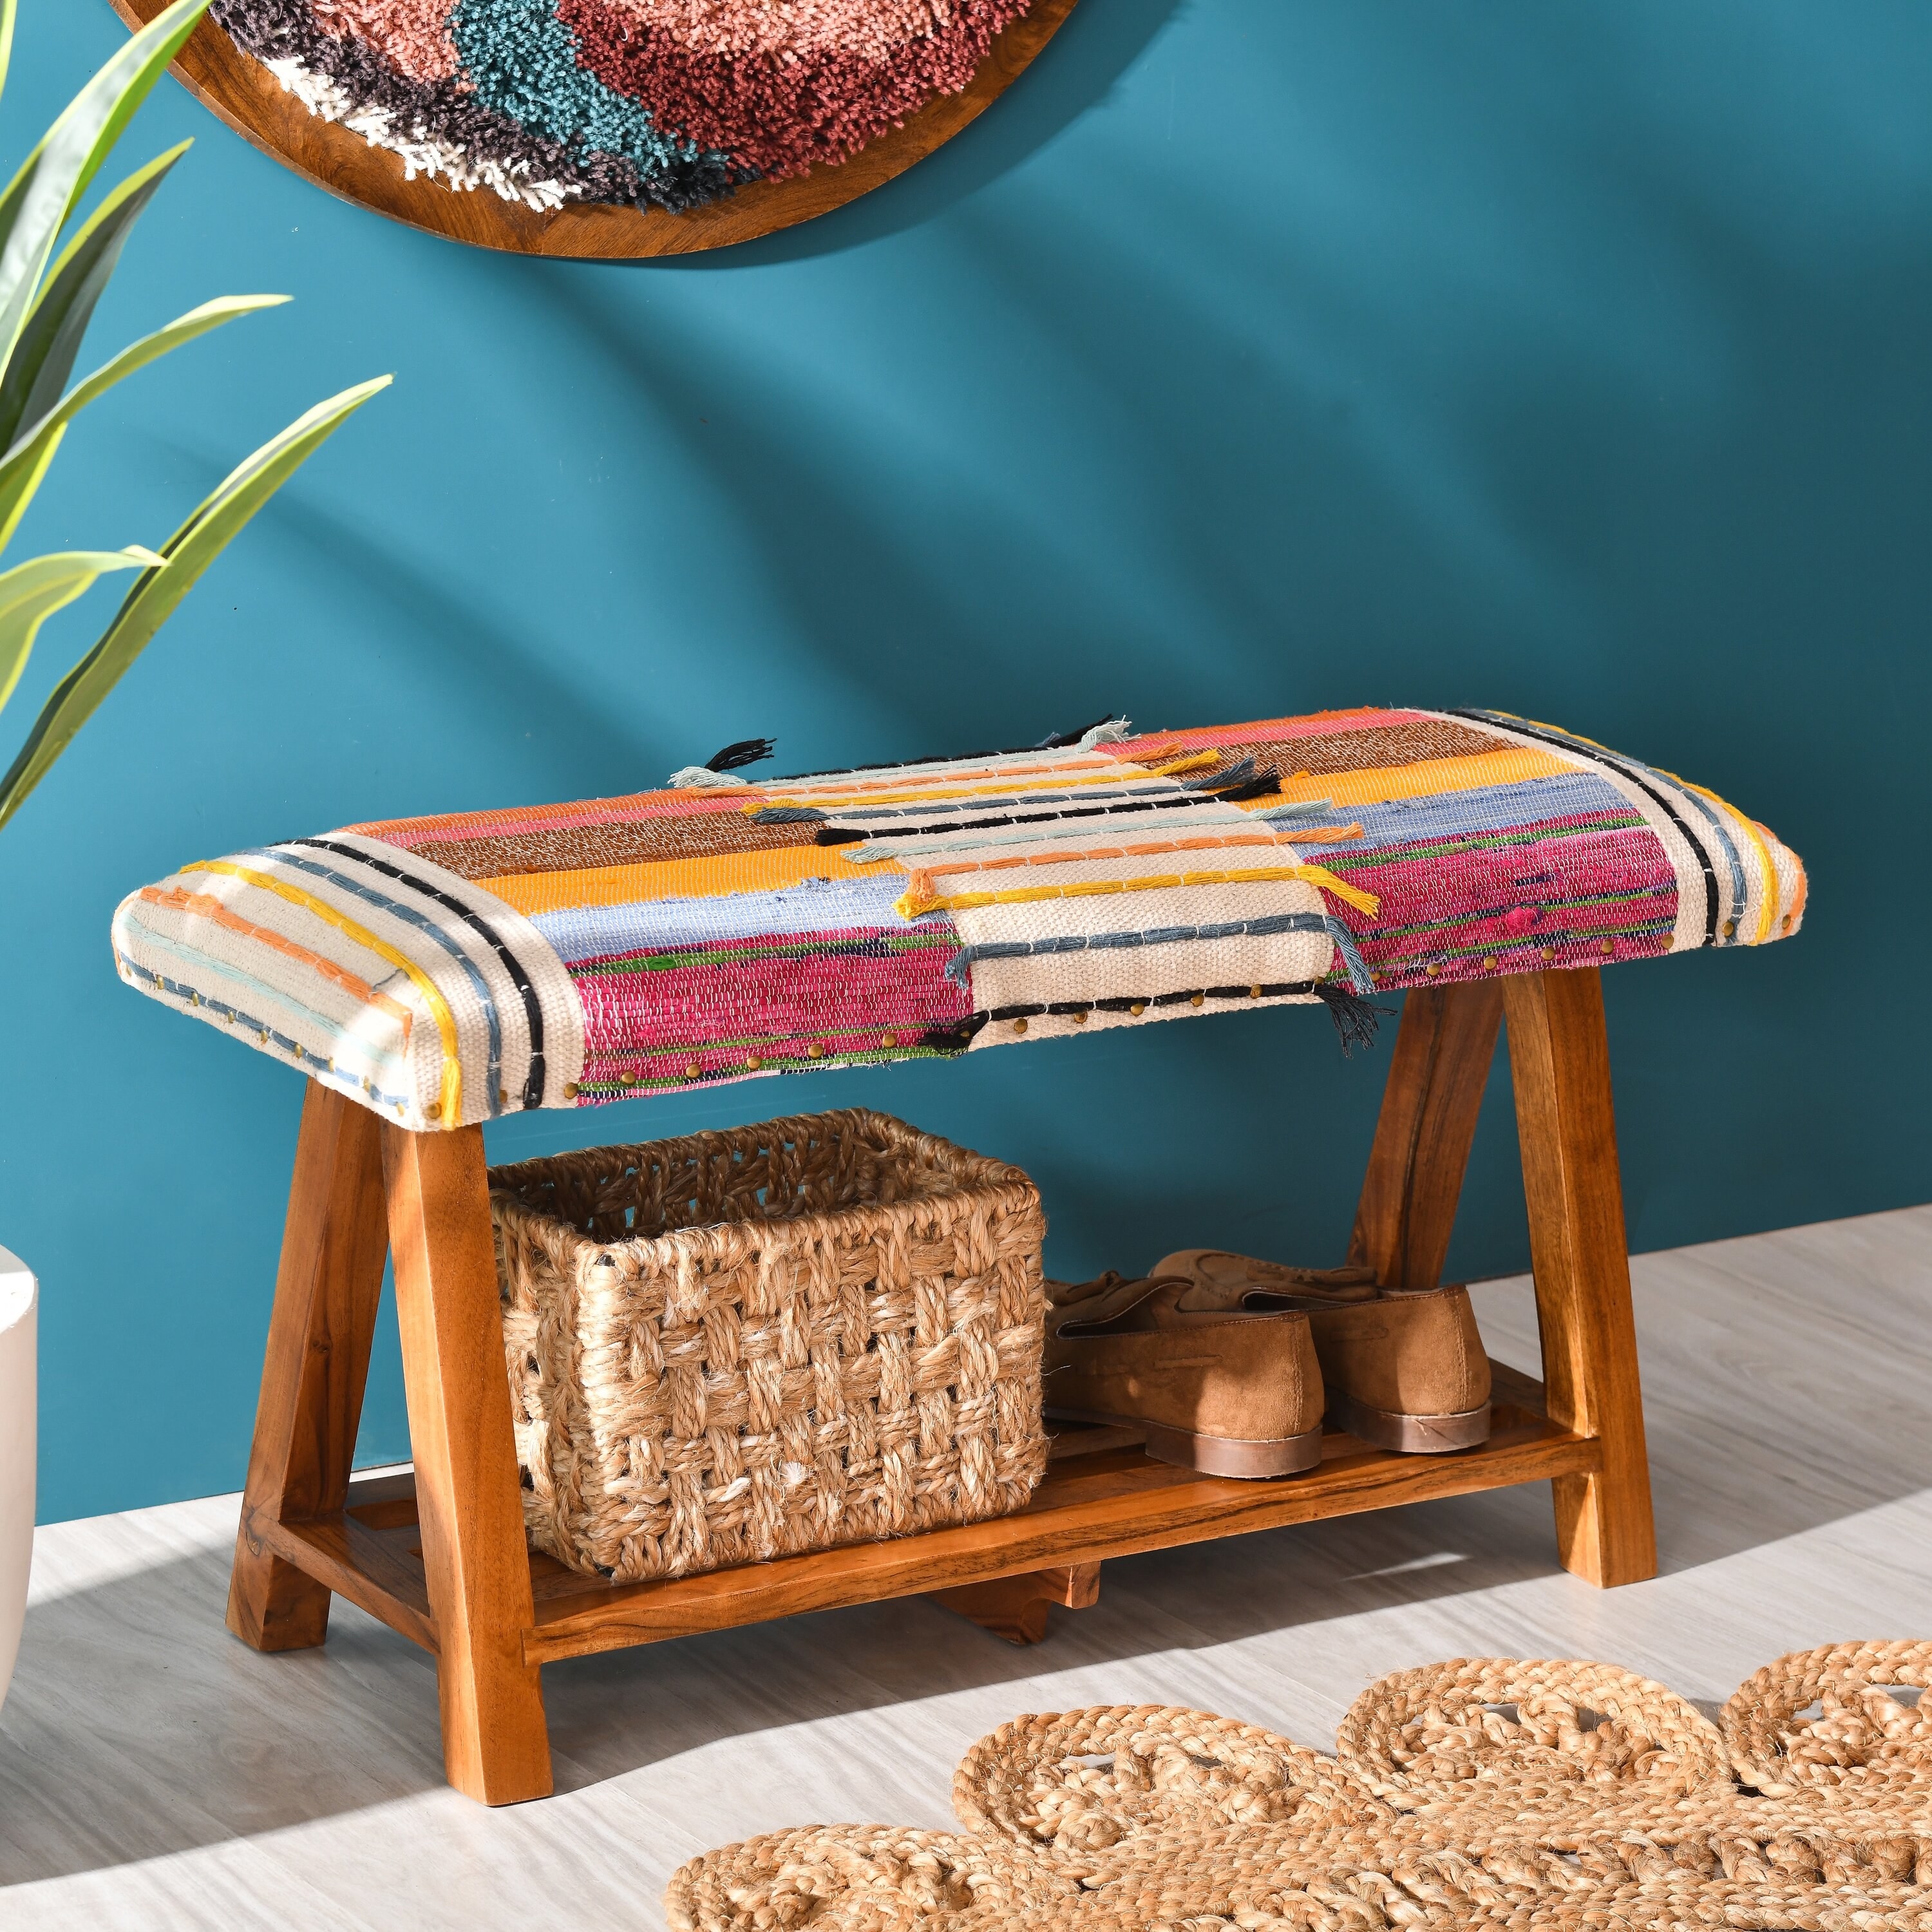 a multicolored upholstered storage bench with wood shelf beneath holding a basket and shoes